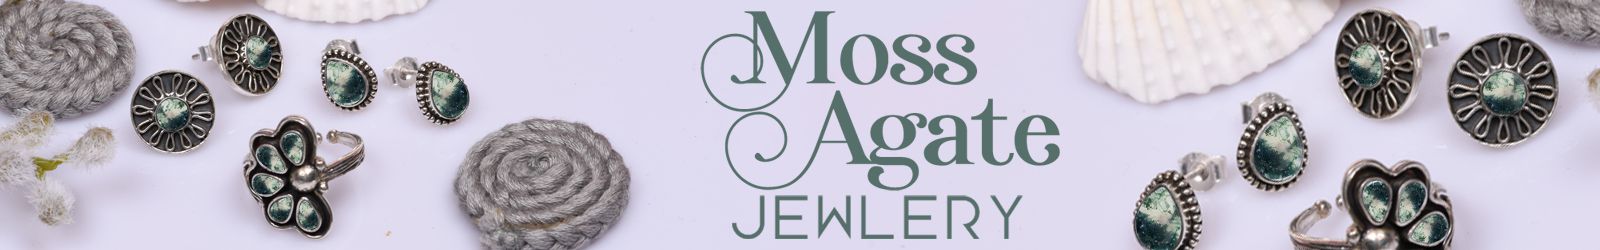 Silver Moss Agate Jewelry Wholesale Supplier